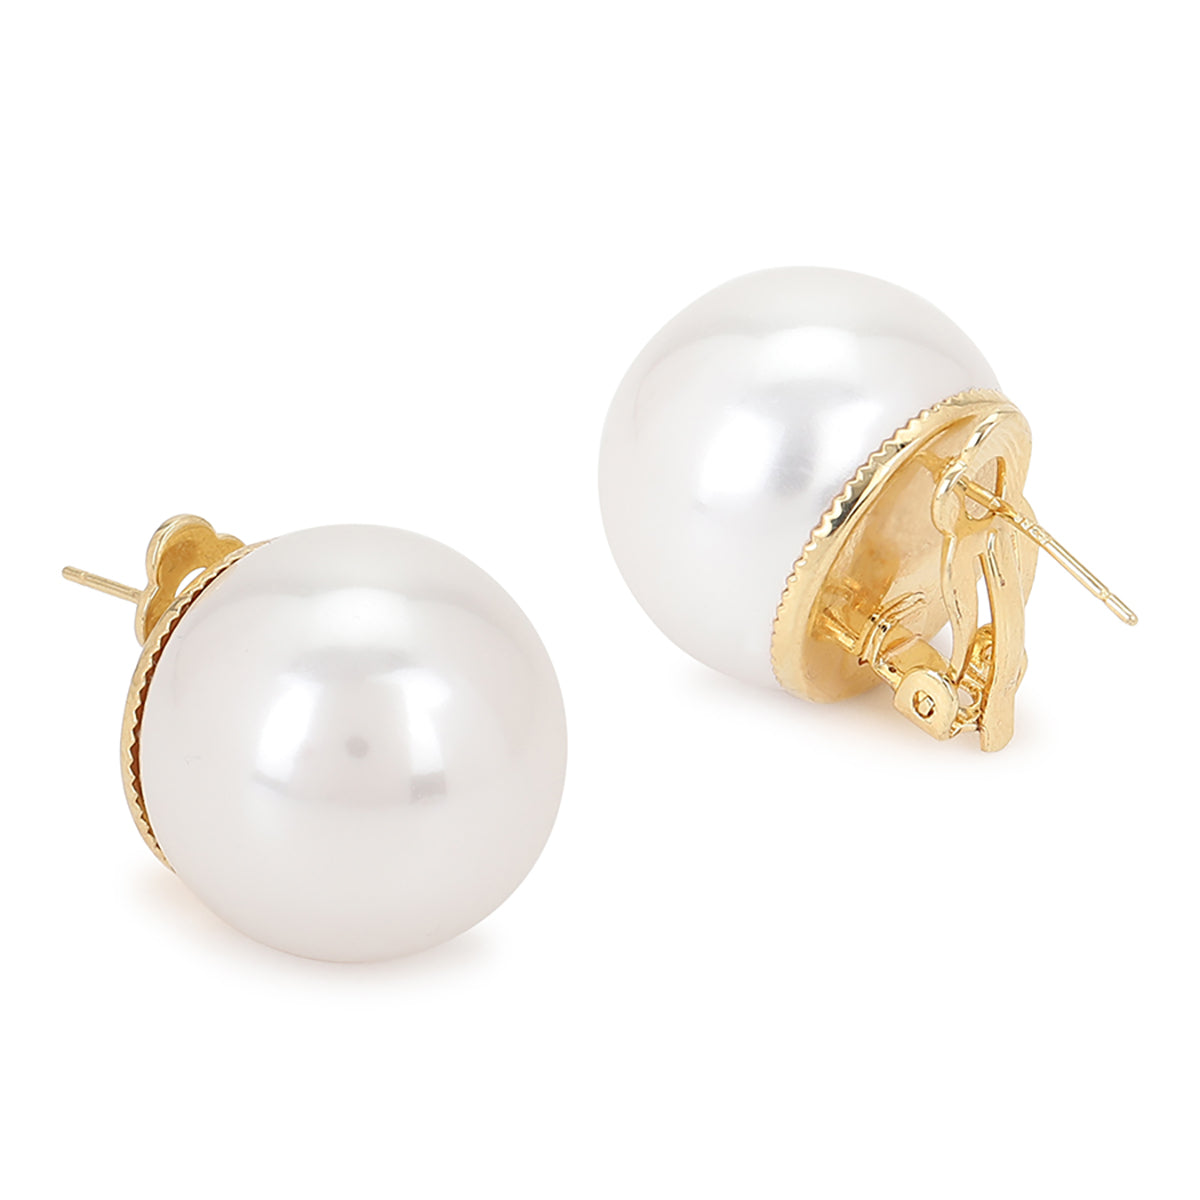 White Contemporary Studs Earrings